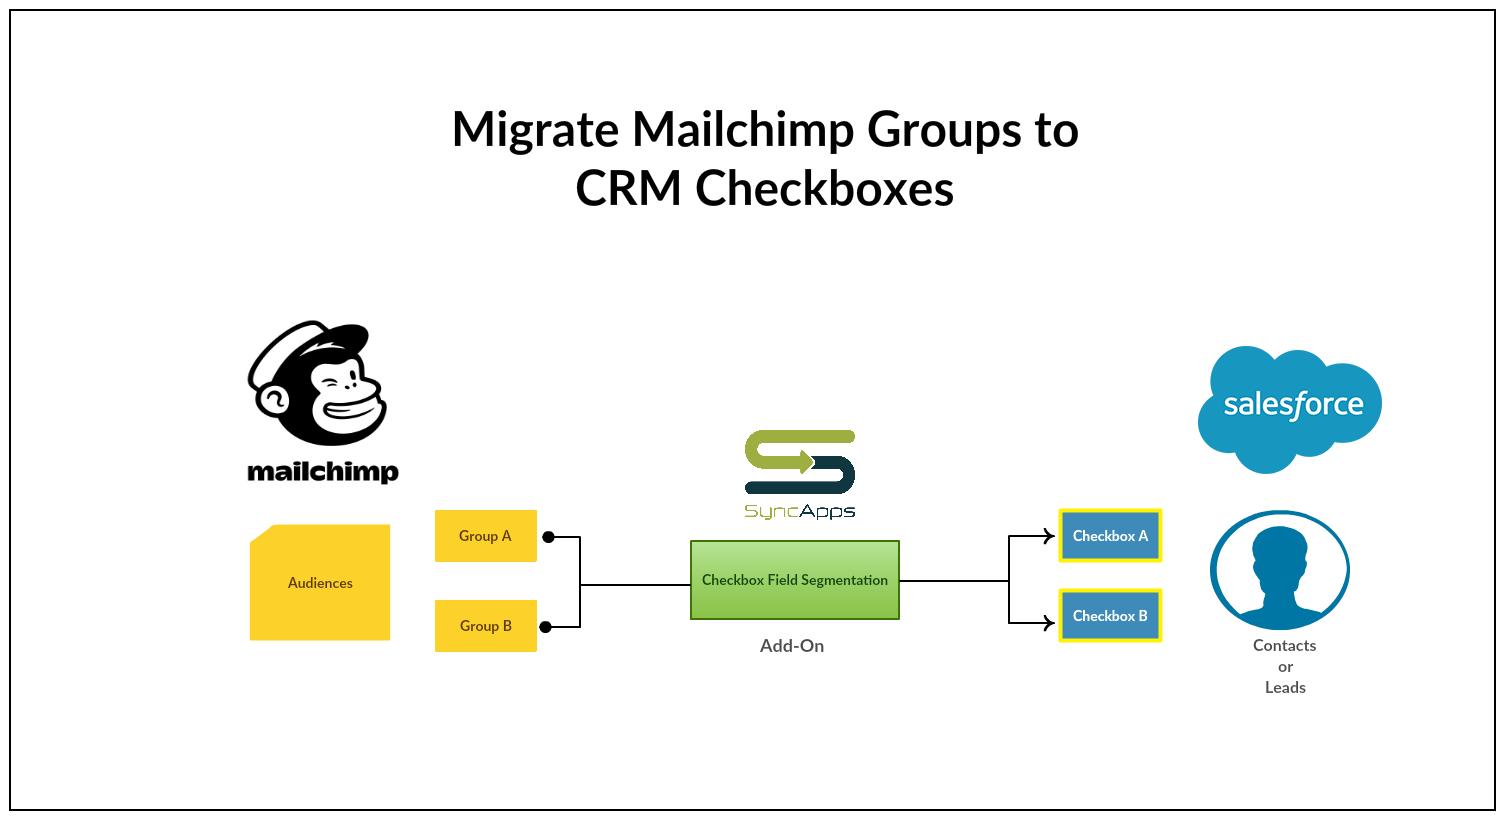 Migrate_Mailchimp_Groups_to_CRM_Checkboxes.png